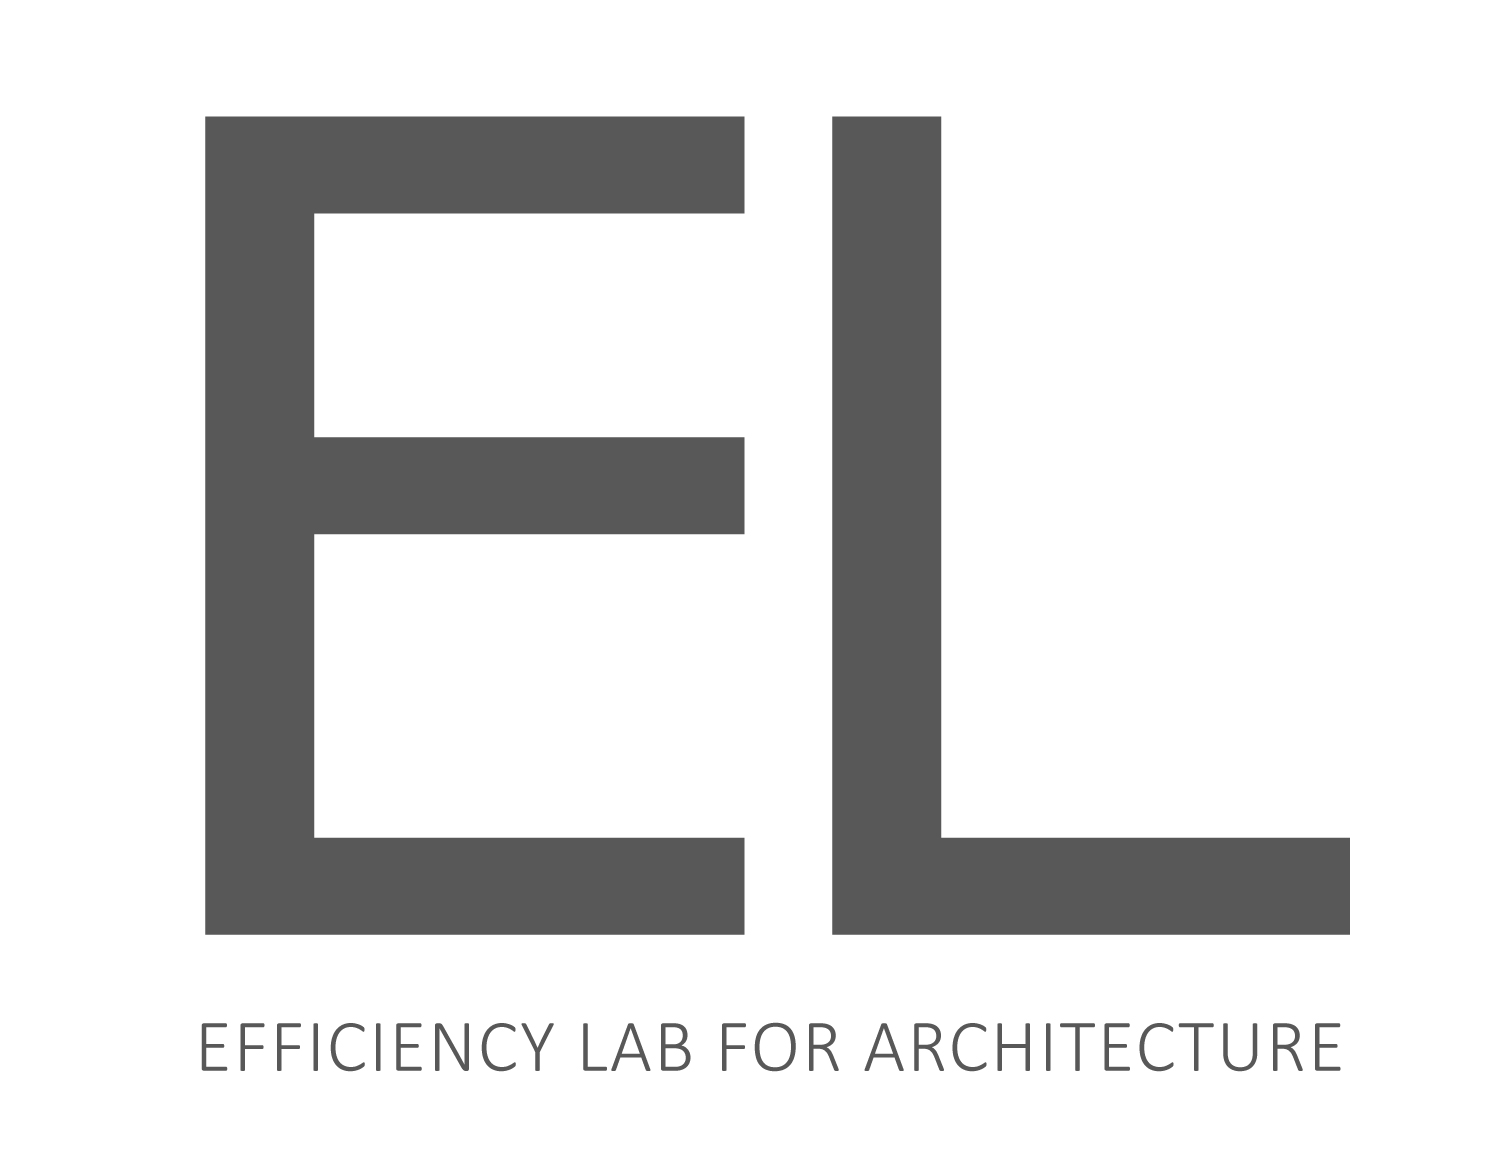 Partnership with Efficiency Lab